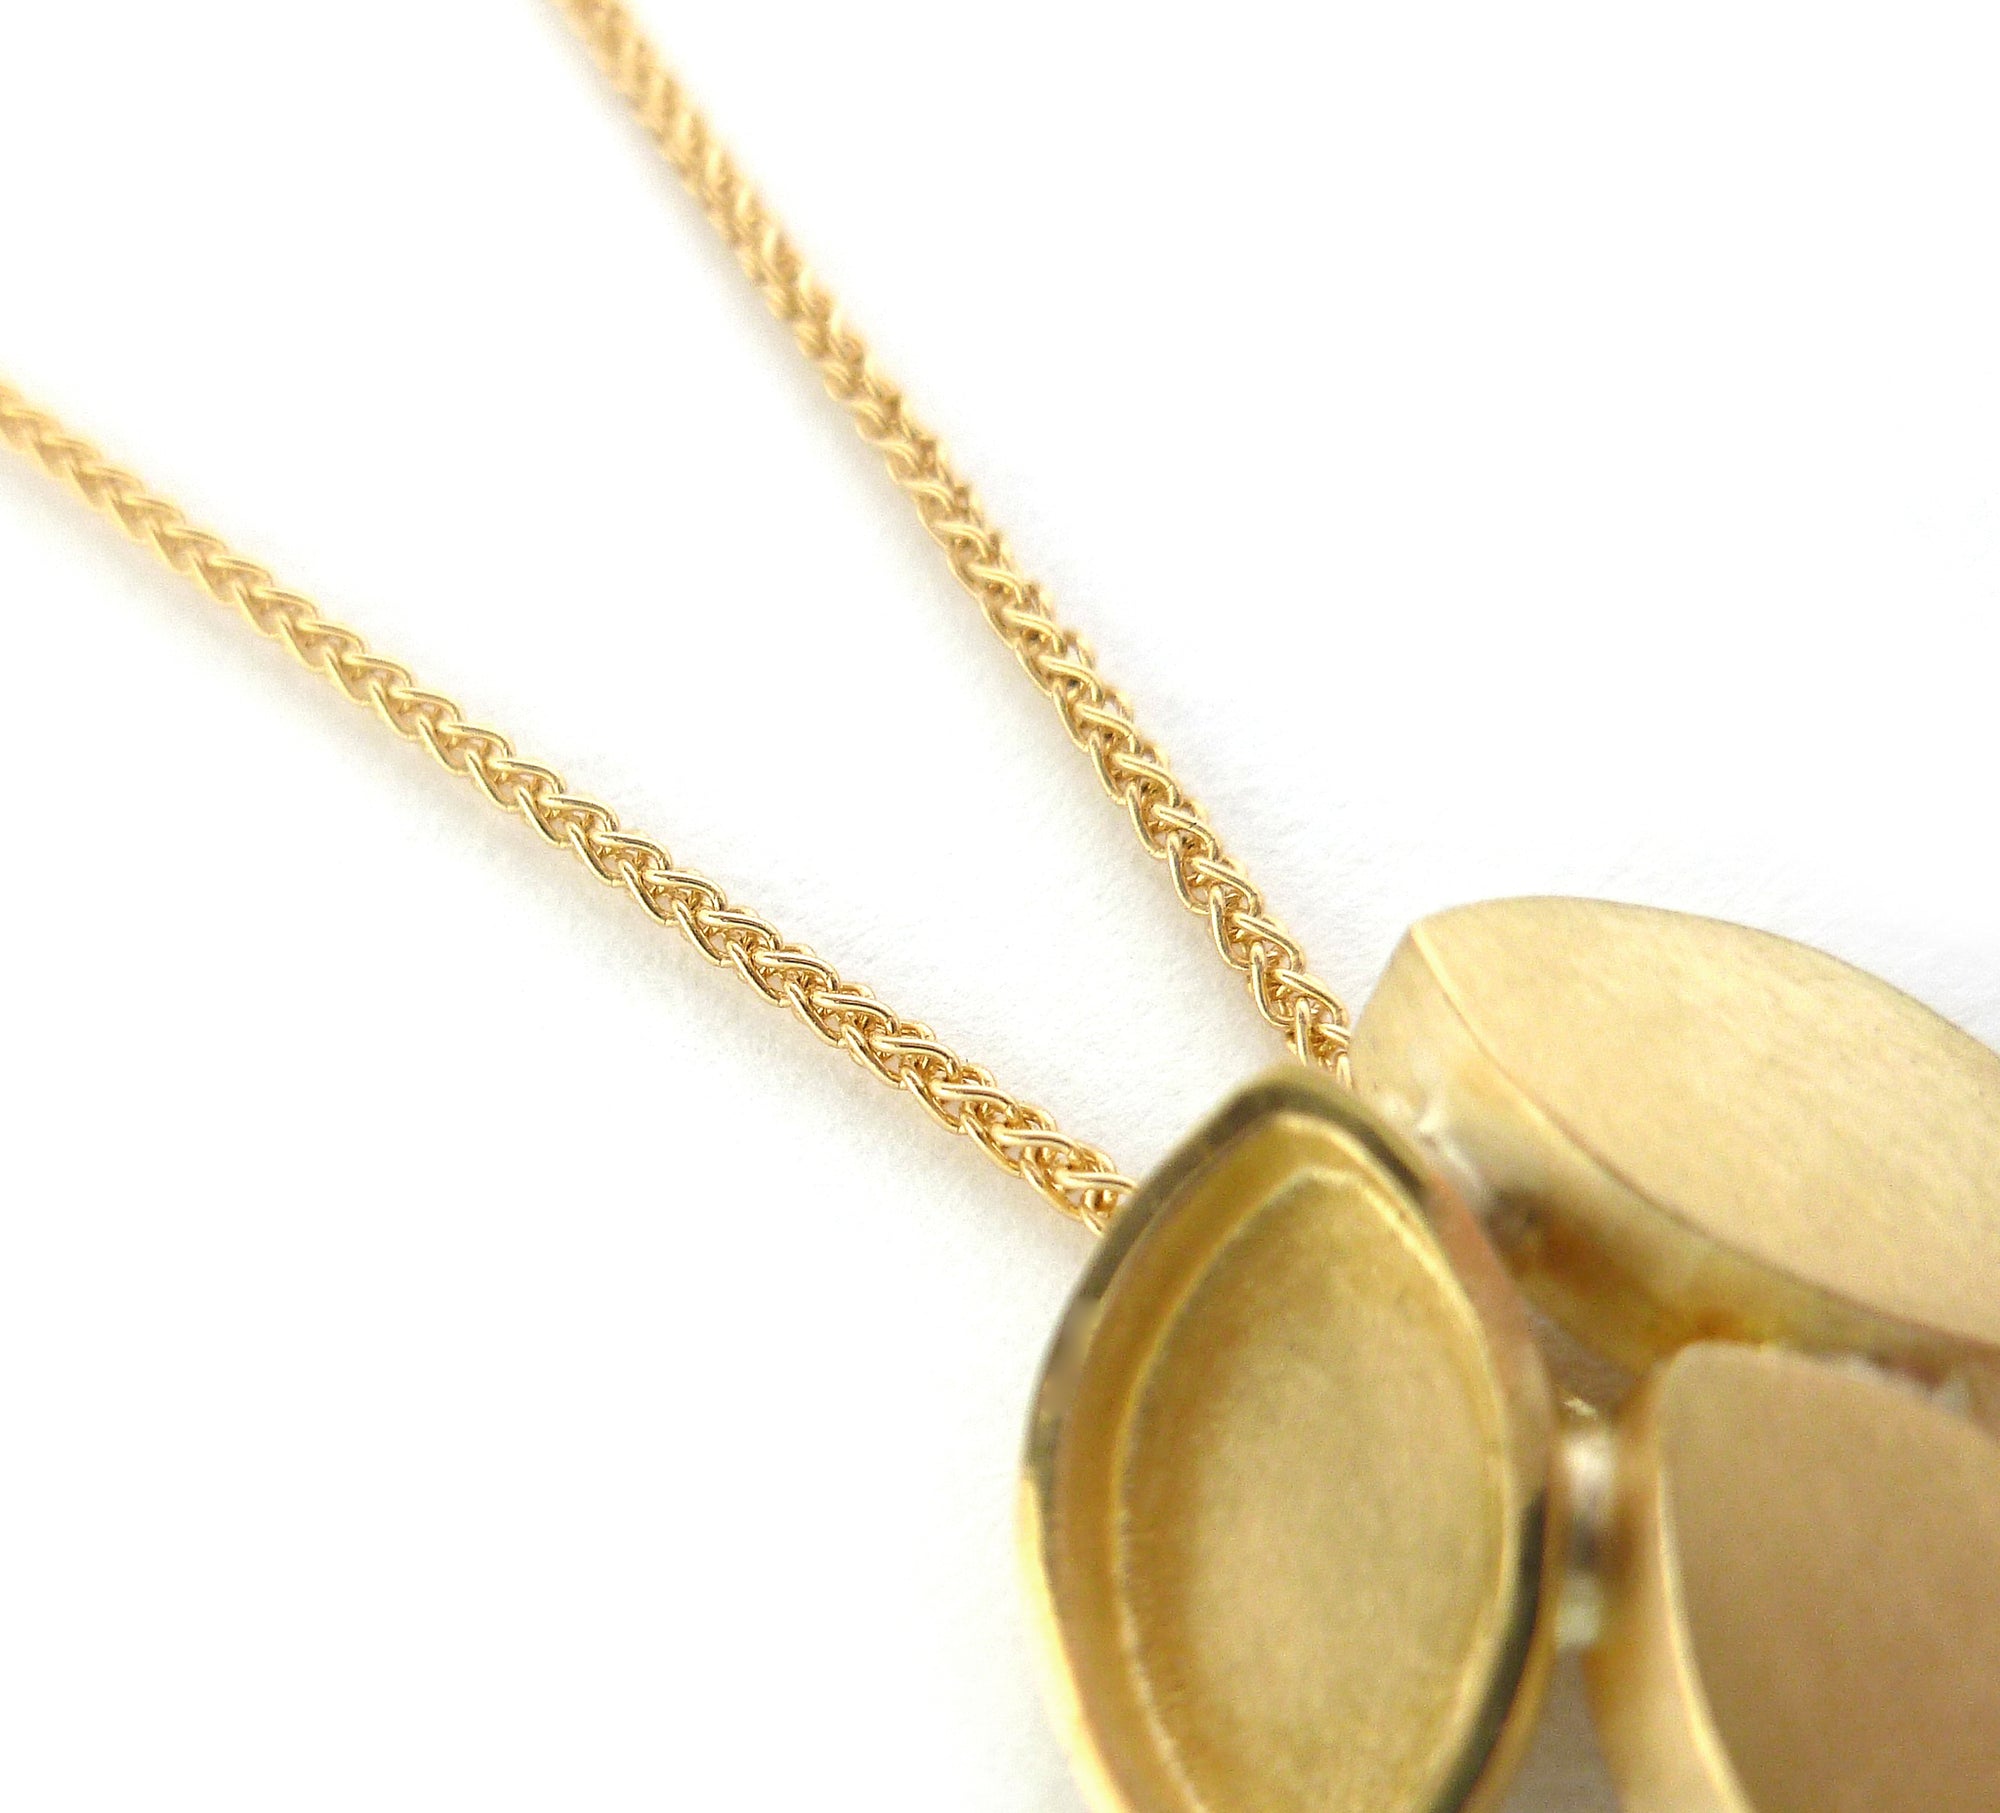 Modern and simple yellow gold leaf contemporary necklace handmade by Sue Lane UK